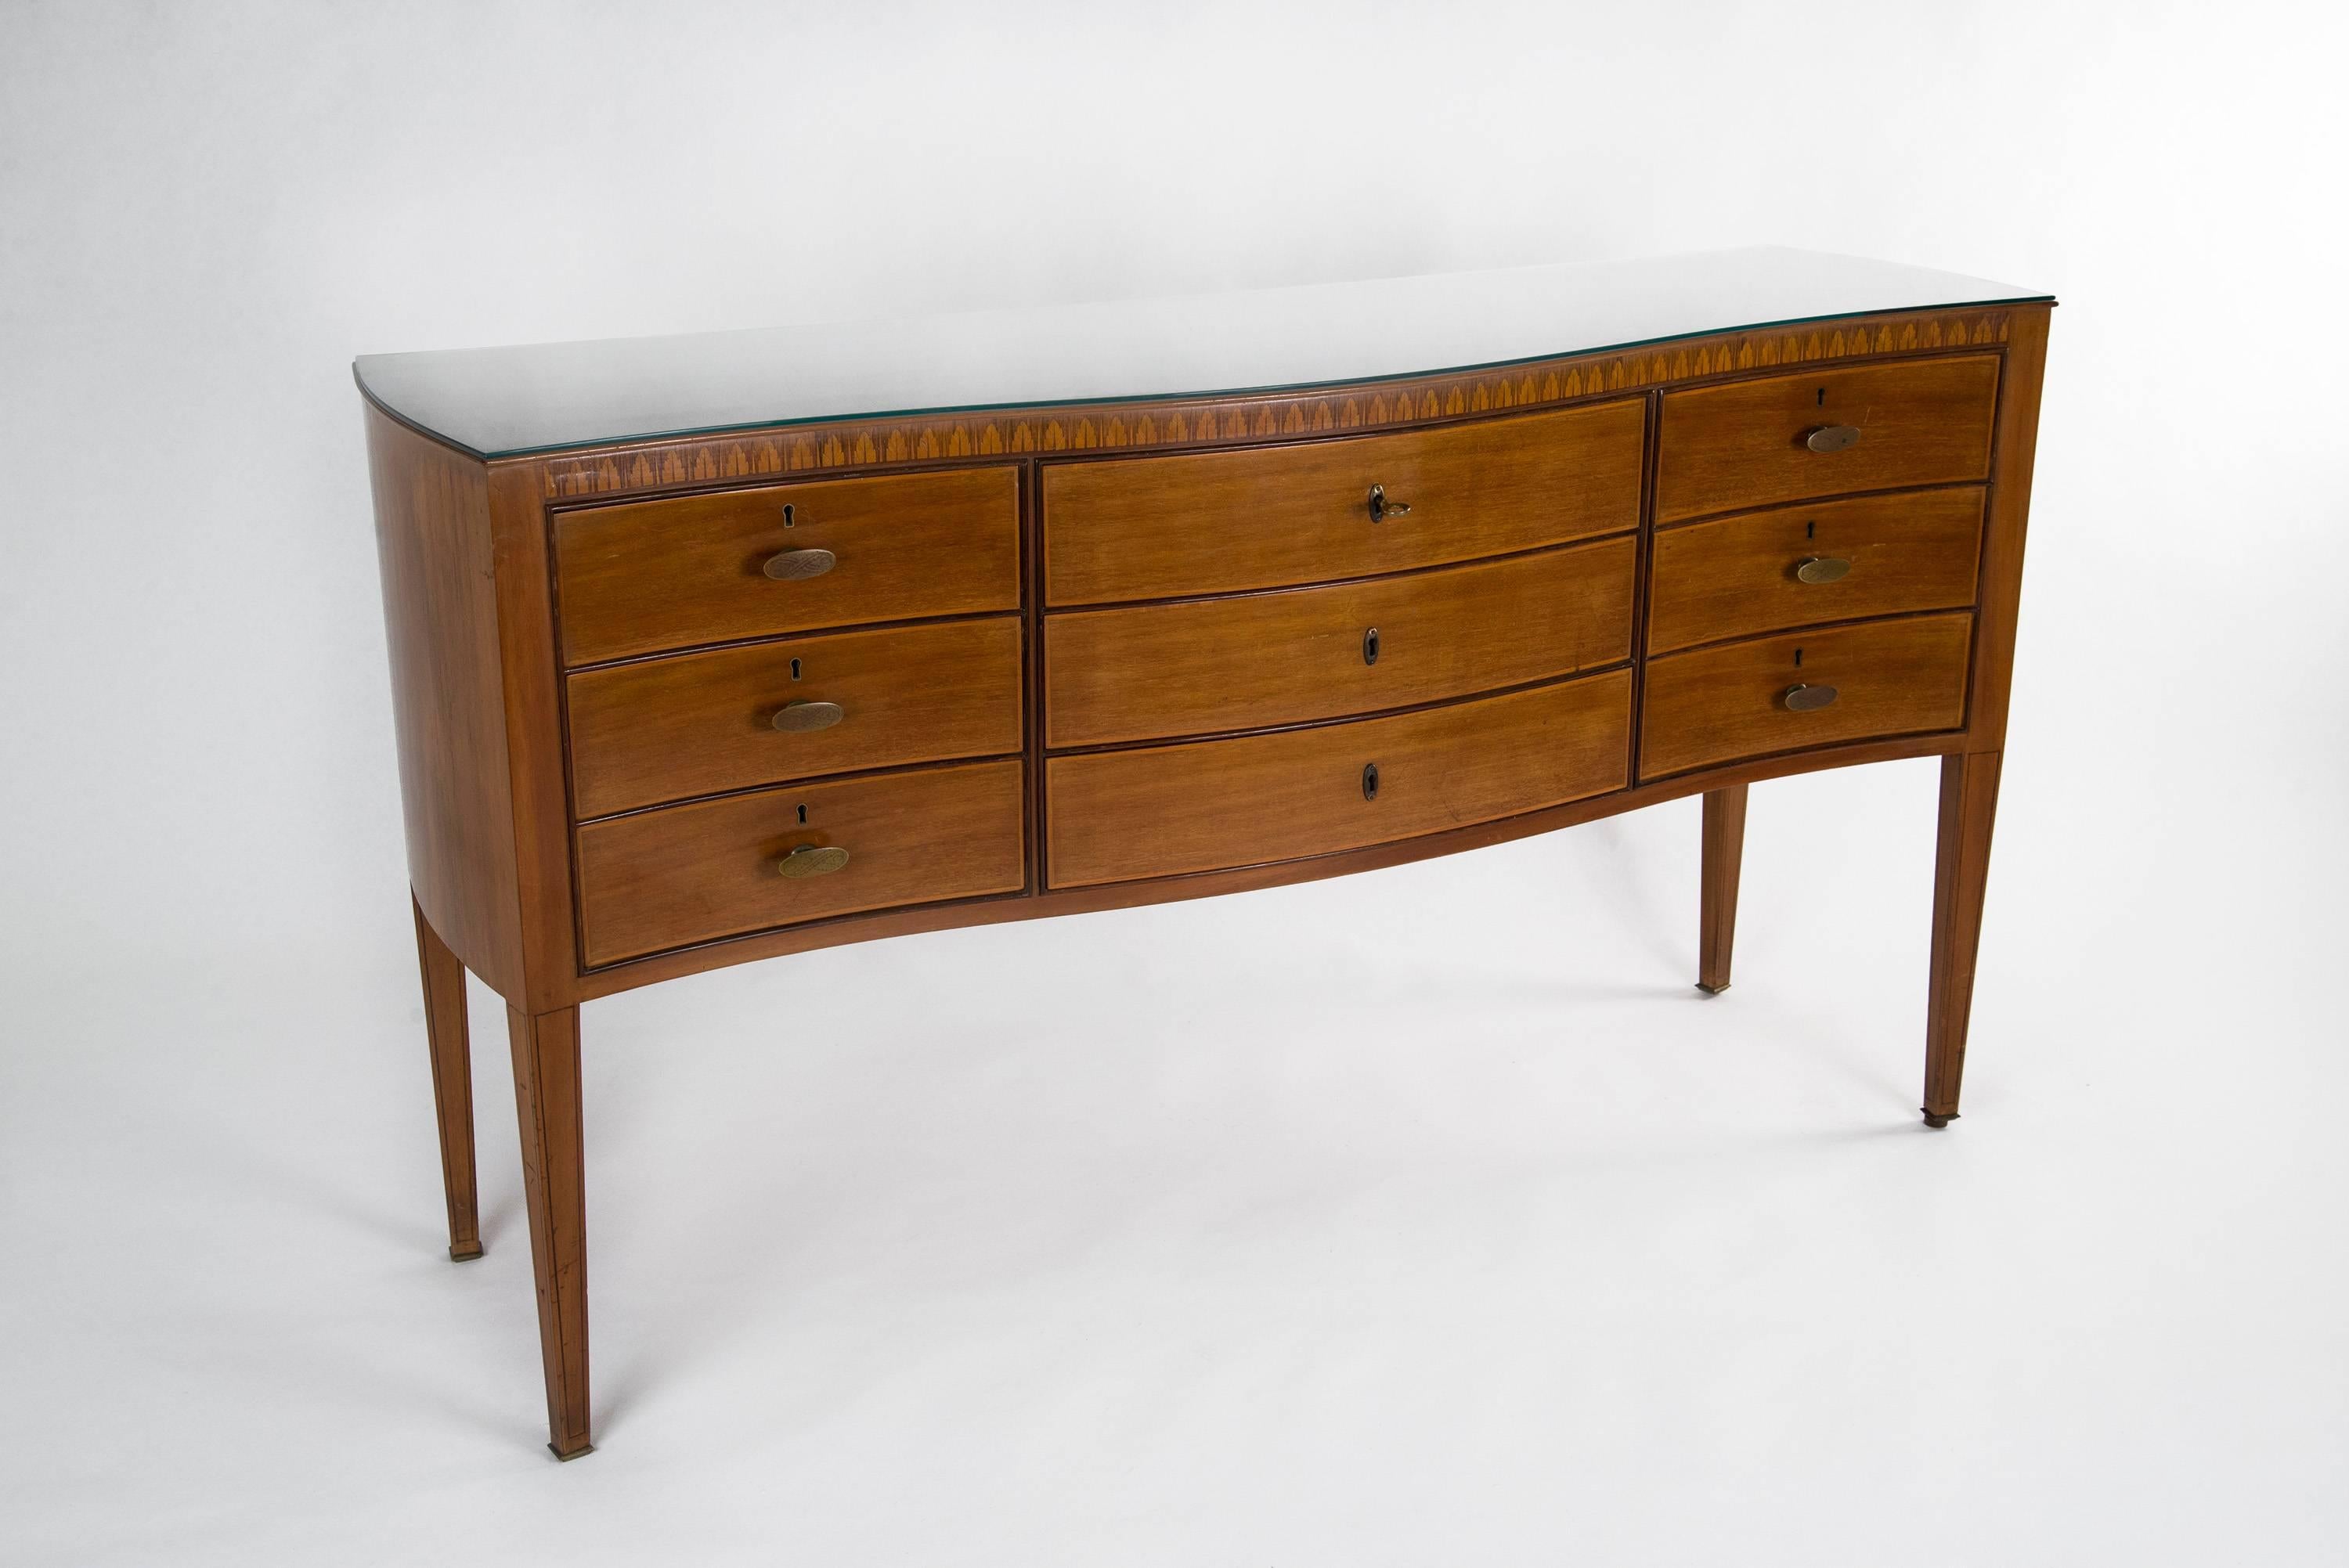 Elegant chest of drawers designed by Paolo Buffa, manufactured in Italy in the 1950s. Wooden structure with exquisite inlaid decorations and beautiful curved shape, carved brass handles, glass top (which can be removed), brass sabots. Good original